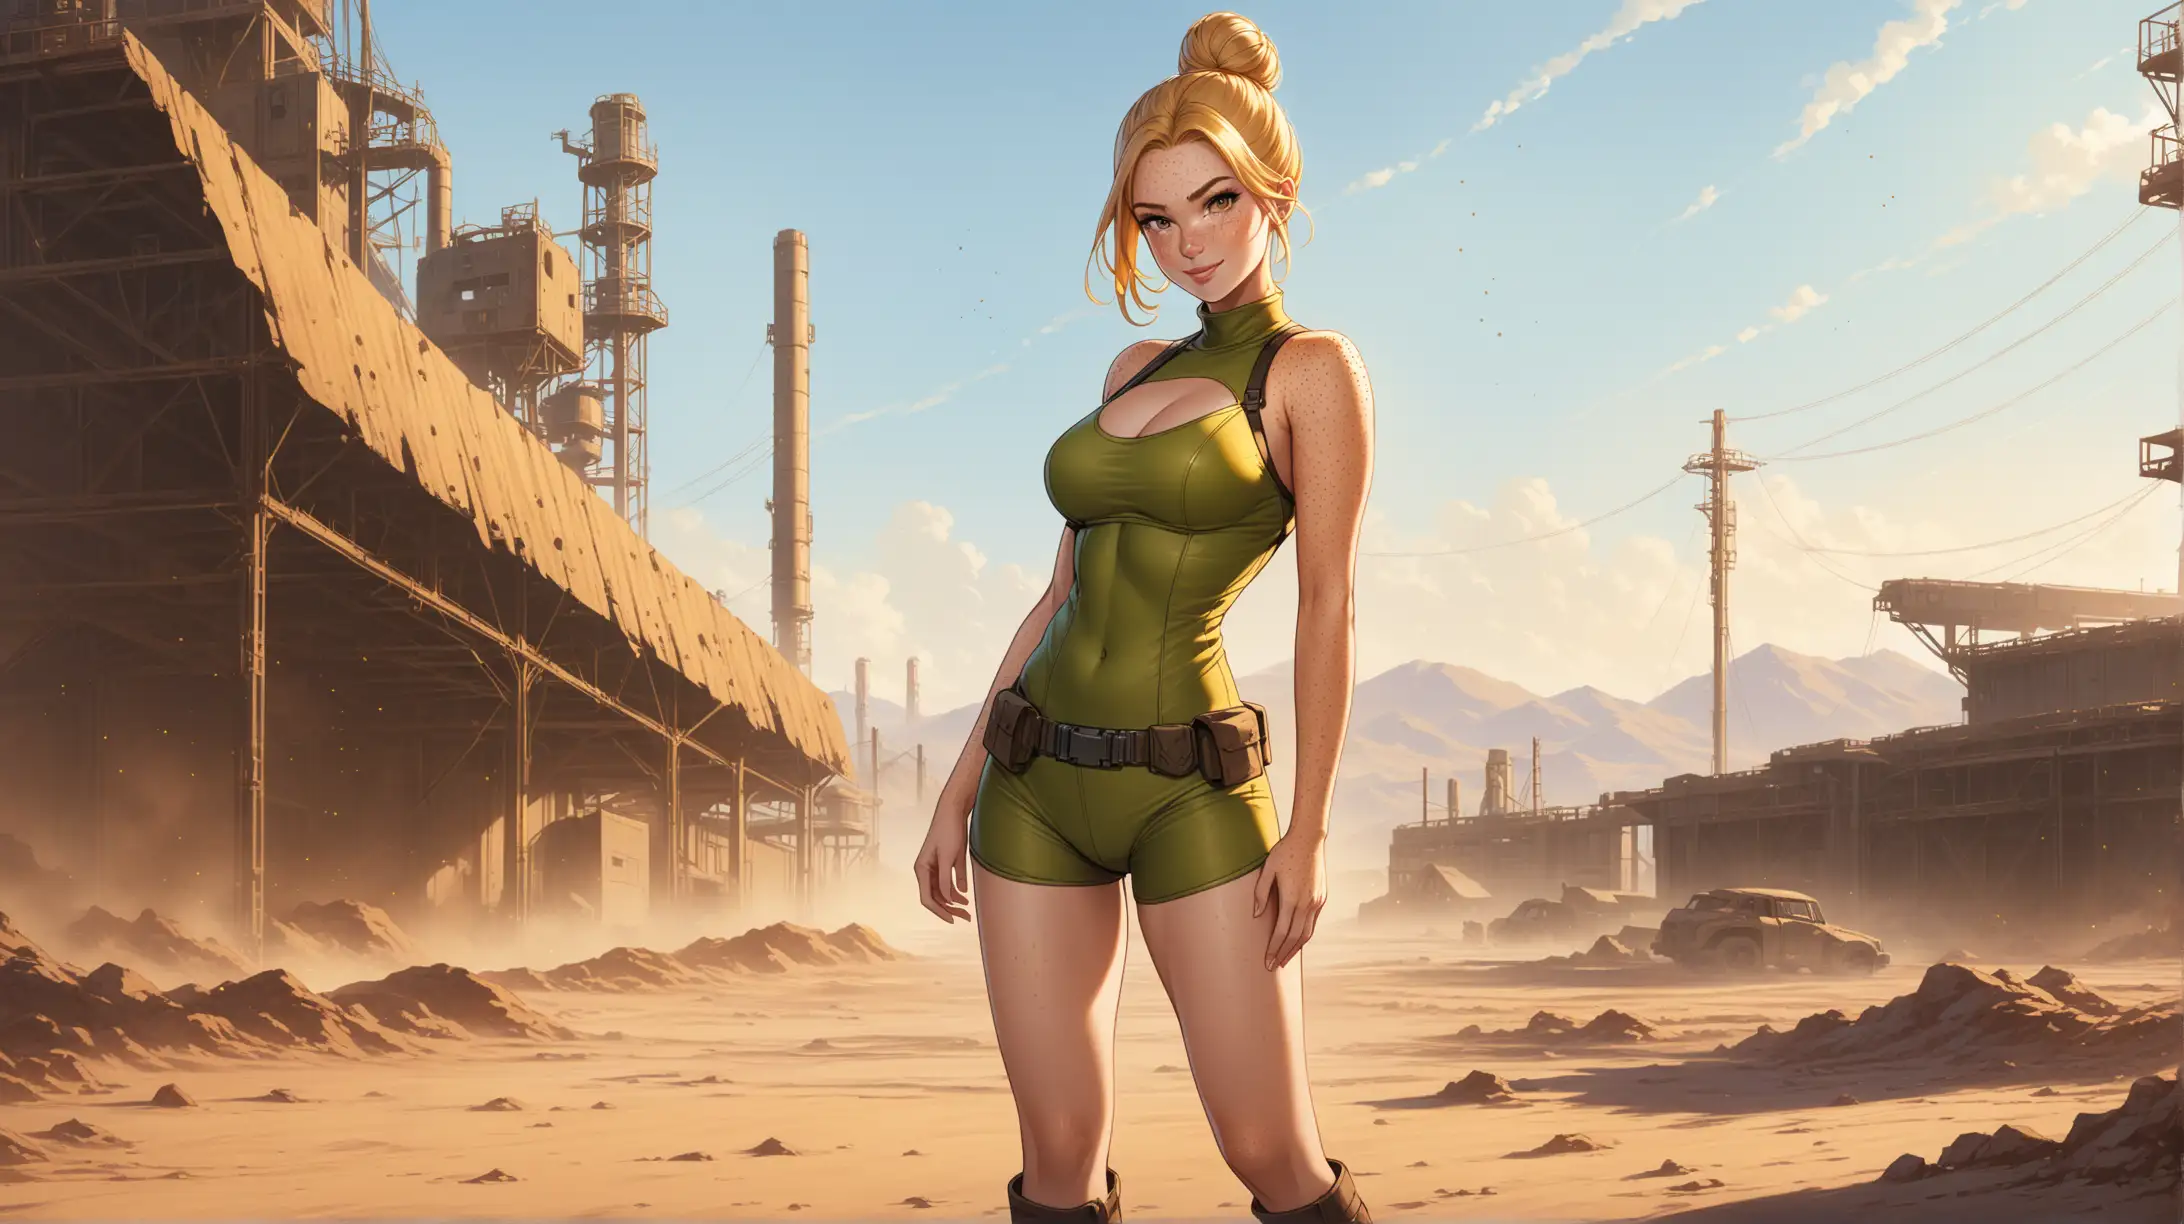 Seductive Blonde Woman in FalloutInspired Outfit Poses Outdoors